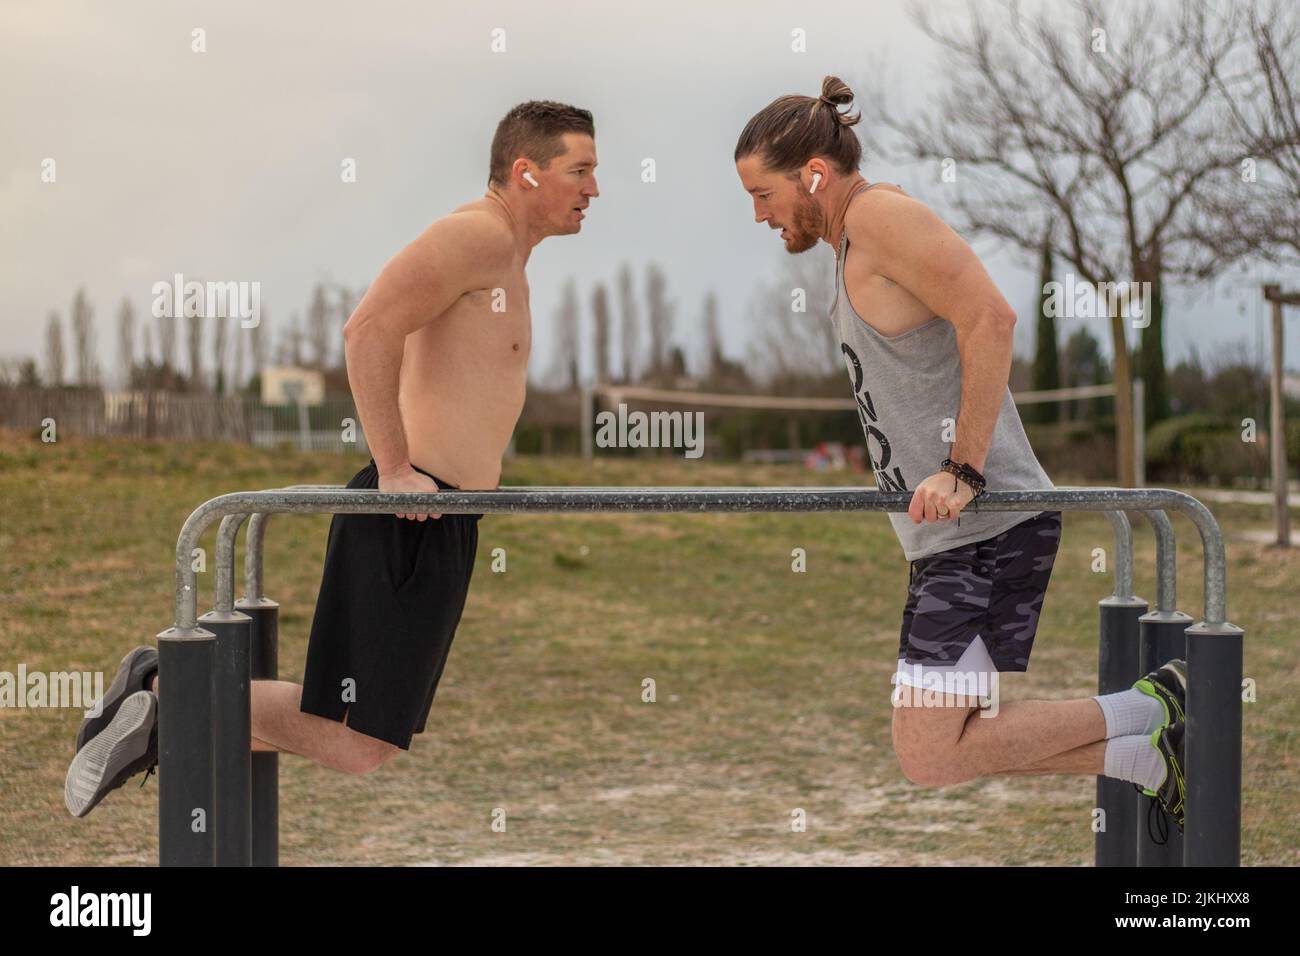 A photo of two men doing a sports session together, face to face on the cross-bar in balance Stock Photo